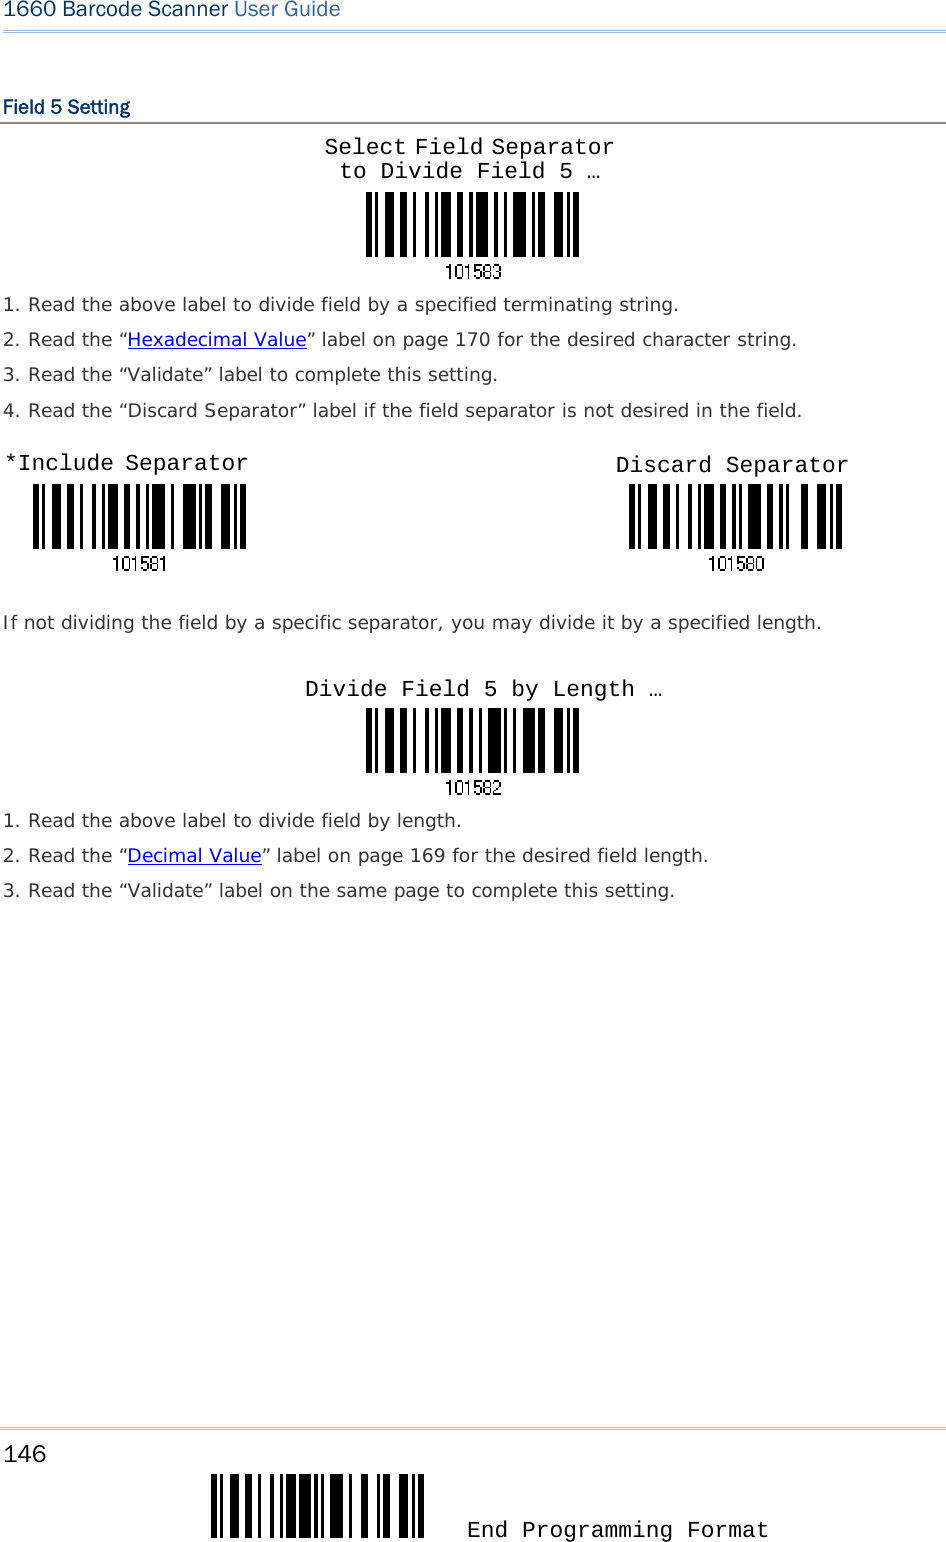 146  End Programming Format 1660 Barcode Scanner User Guide  Field 5 Setting    1. Read the above label to divide field by a specified terminating string. 2. Read the “Hexadecimal Value” label on page 170 for the desired character string.  3. Read the “Validate” label to complete this setting. 4. Read the “Discard Separator” label if the field separator is not desired in the field.                                 If not dividing the field by a specific separator, you may divide it by a specified length.    1. Read the above label to divide field by length. 2. Read the “Decimal Value” label on page 169 for the desired field length. 3. Read the “Validate” label on the same page to complete this setting.                   Select Field Separator to Divide Field 5 … *Include Separator  Discard Separator Divide Field 5 by Length …